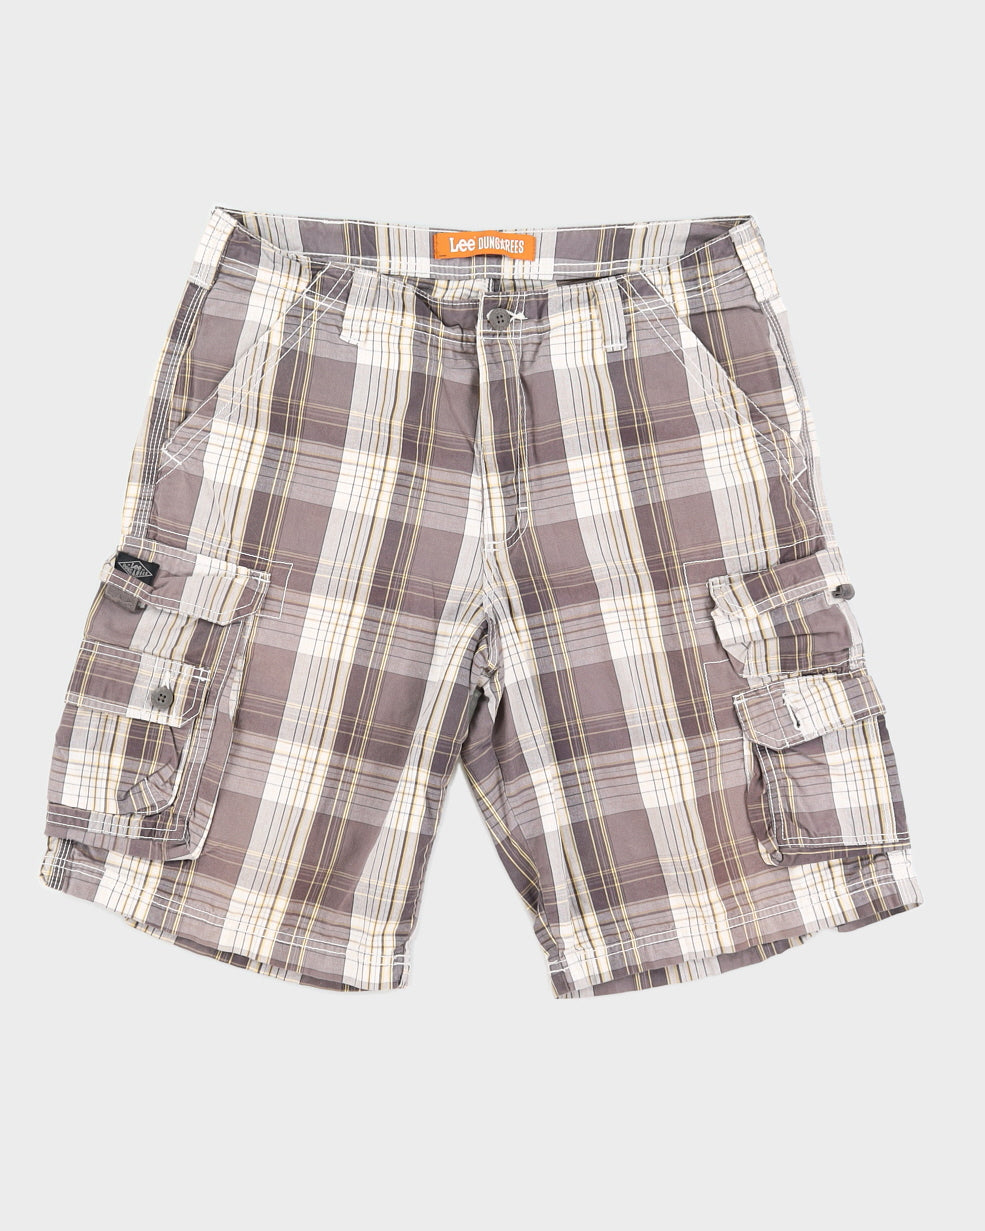 Lee Dungarees Grey Checked Cargo Shorts - W38